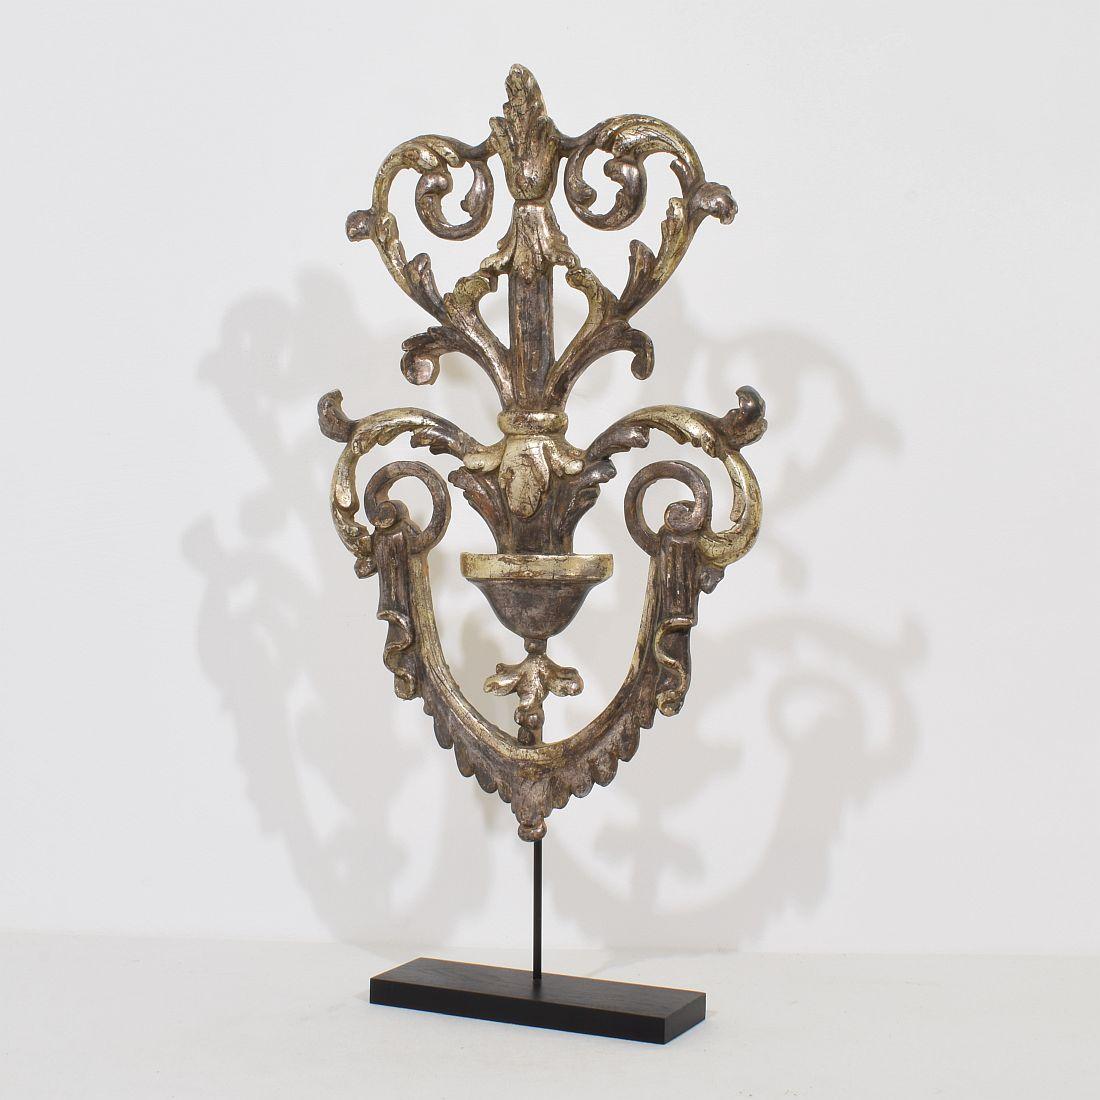 Wonderful hand carved wooden ornament in Baroque style with traces of its original silver. Italy circa 1880-1900
Weathered small losses and old repairs. measurements include the wooden base.